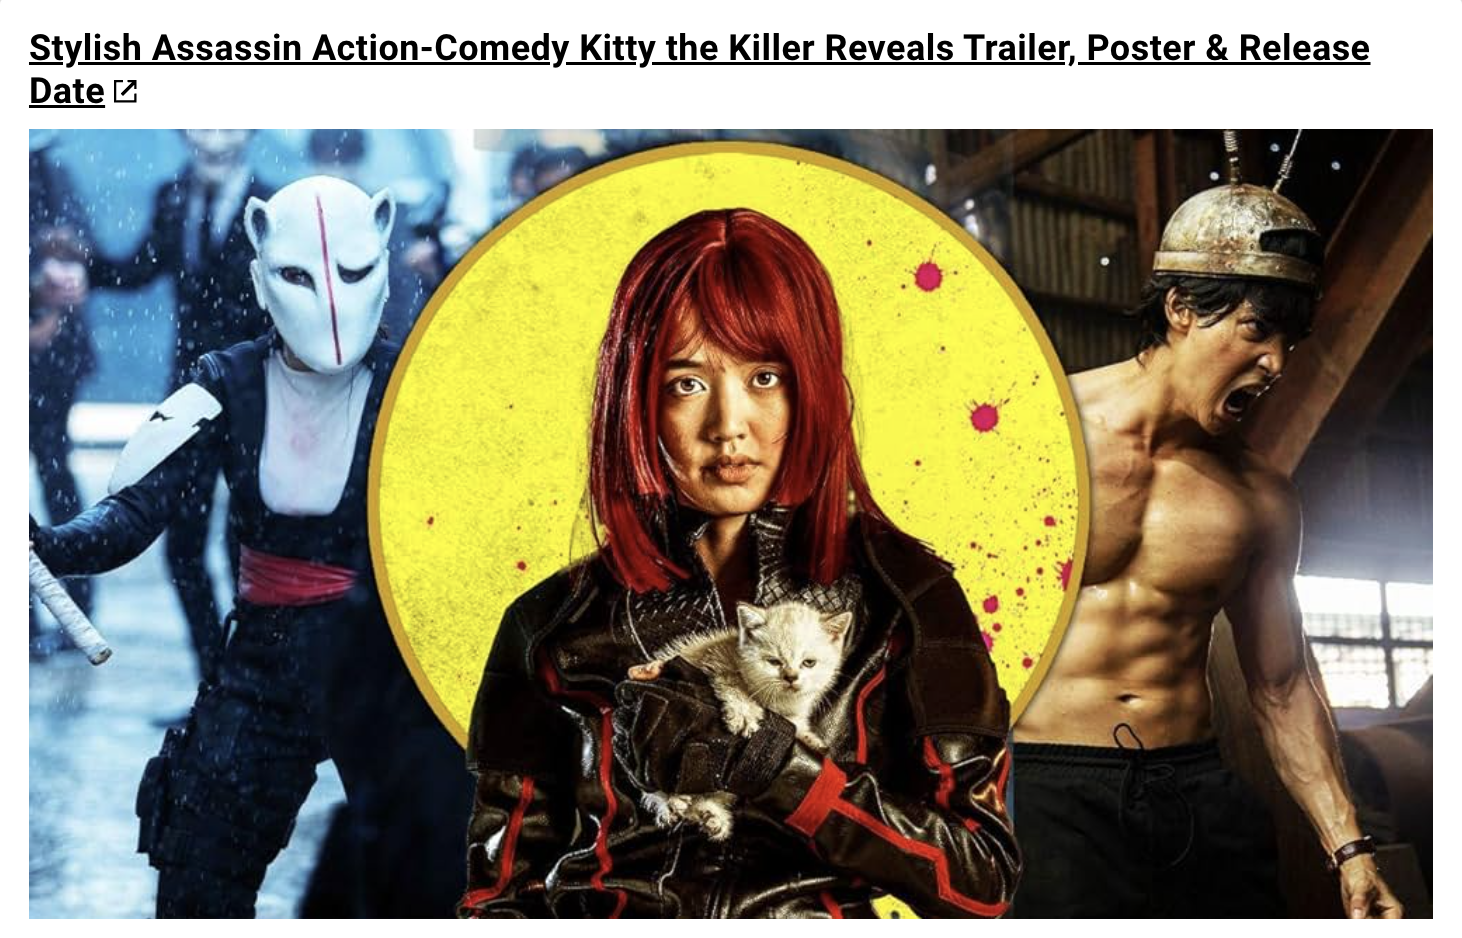 Stylish Assassin Action-Comedy Kitty the Killer Reveals Trailer, Poster & Release Date